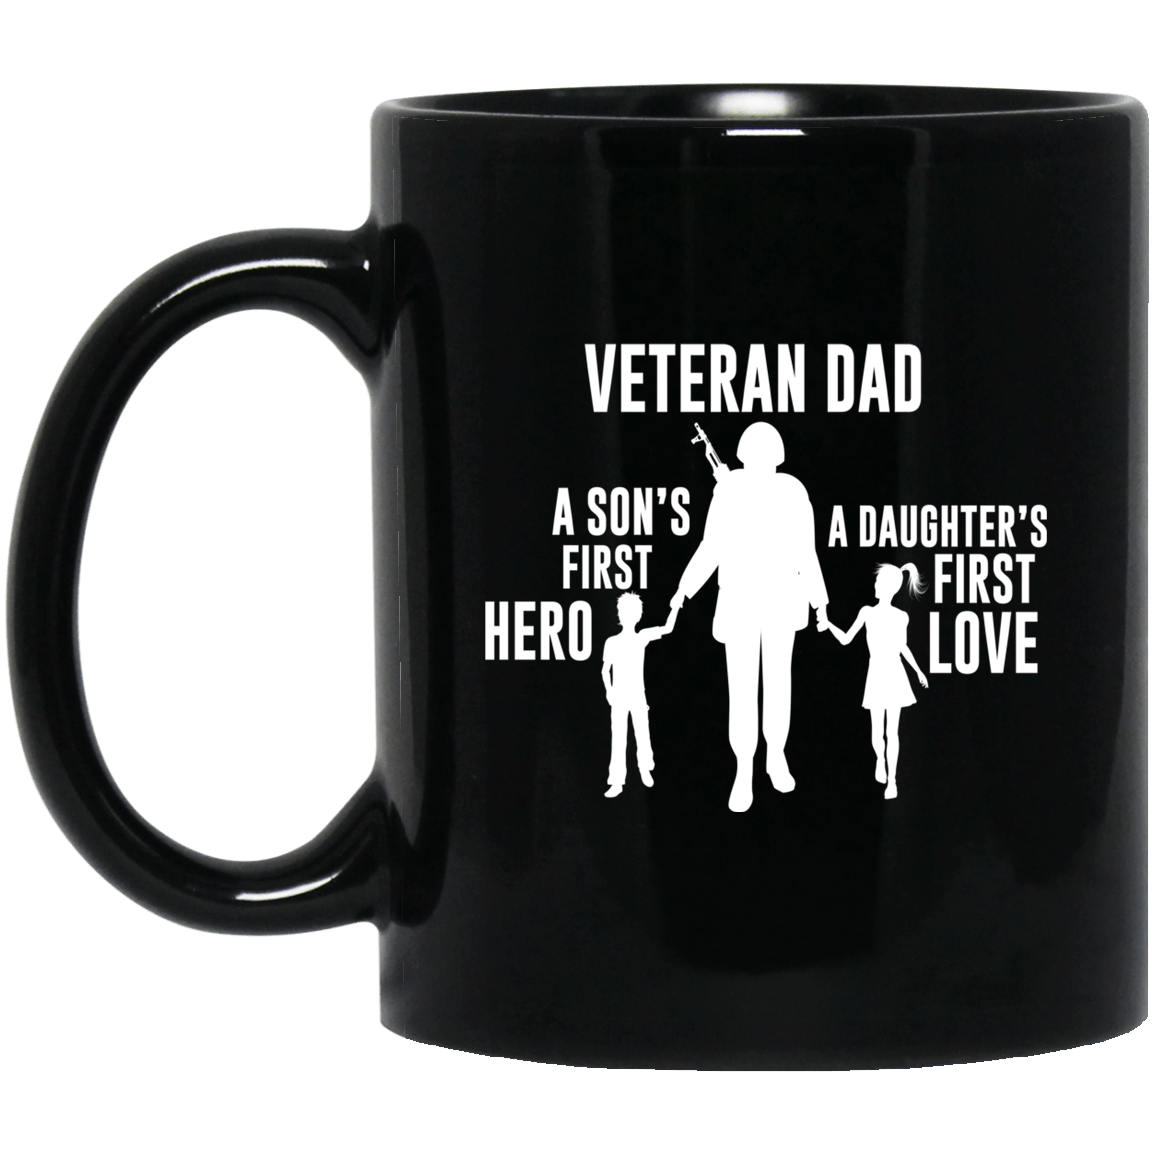 Veteran Dad Coffee Mug A Son’S First Hero A Daughter’S First Love Veterans Day Gifts For Men